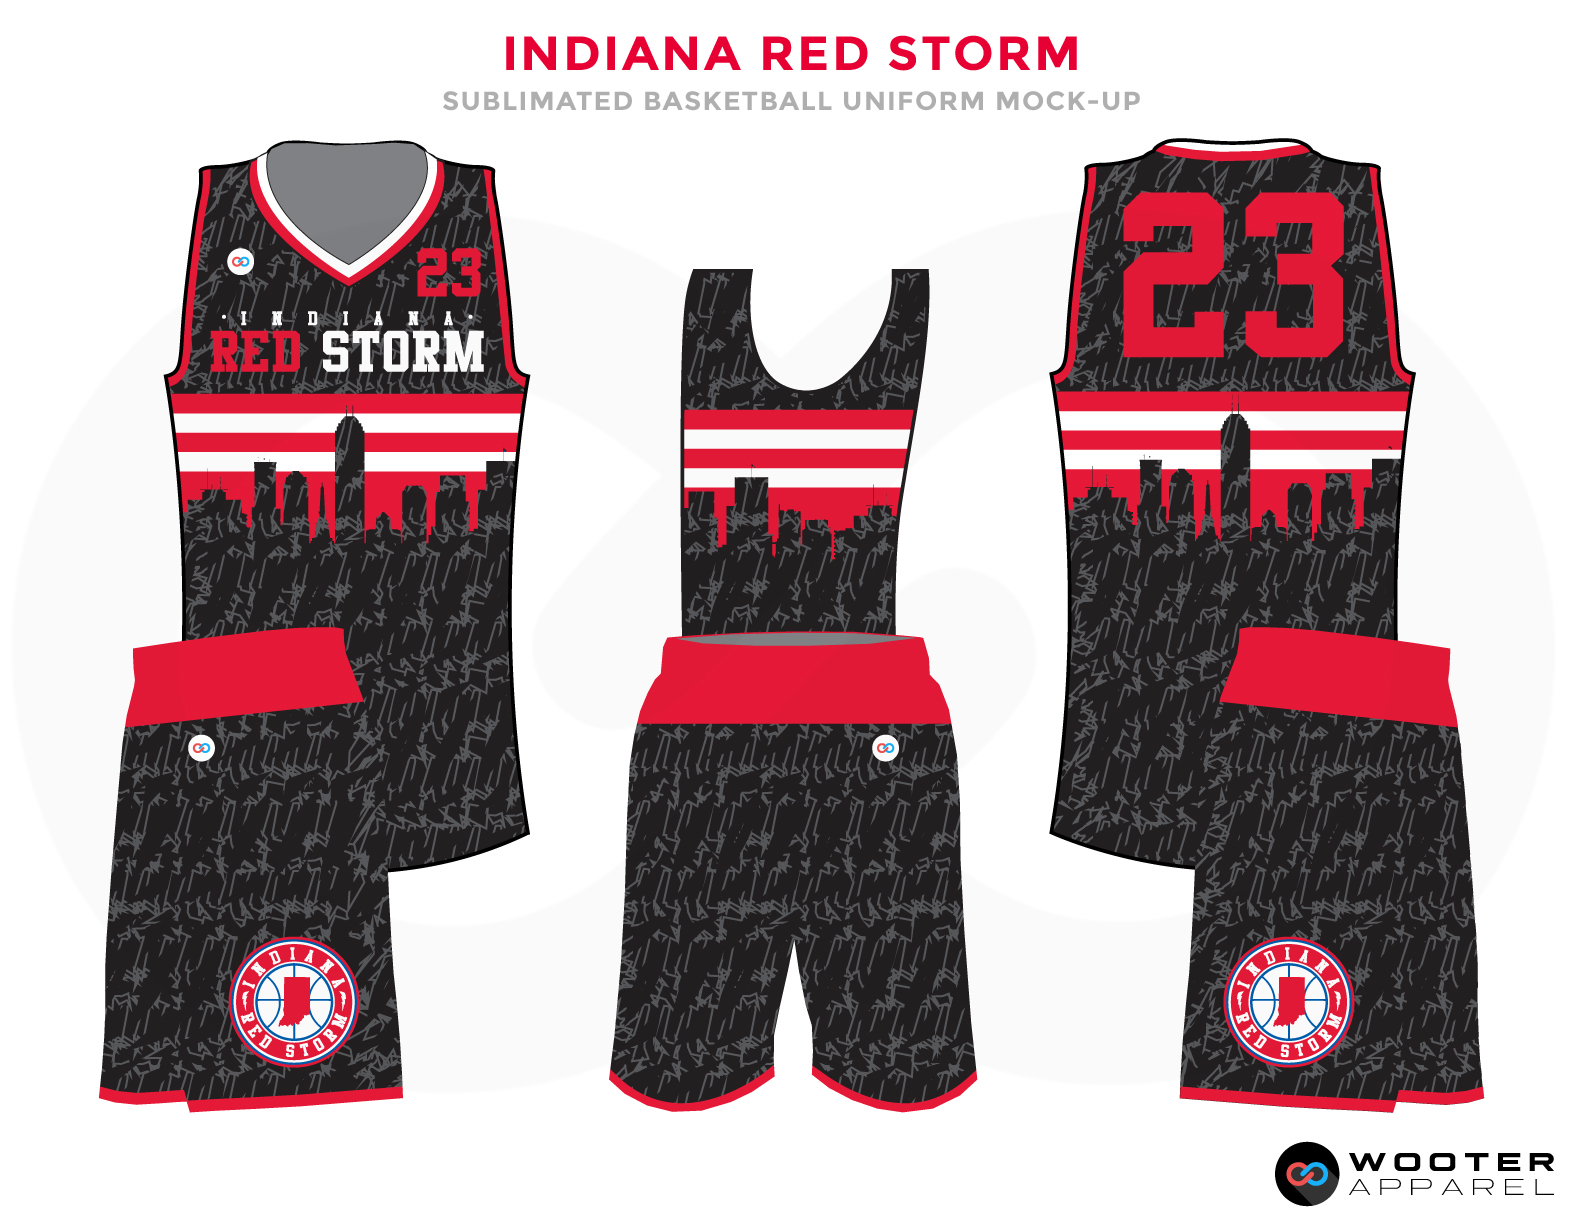 basketball jersey black and red